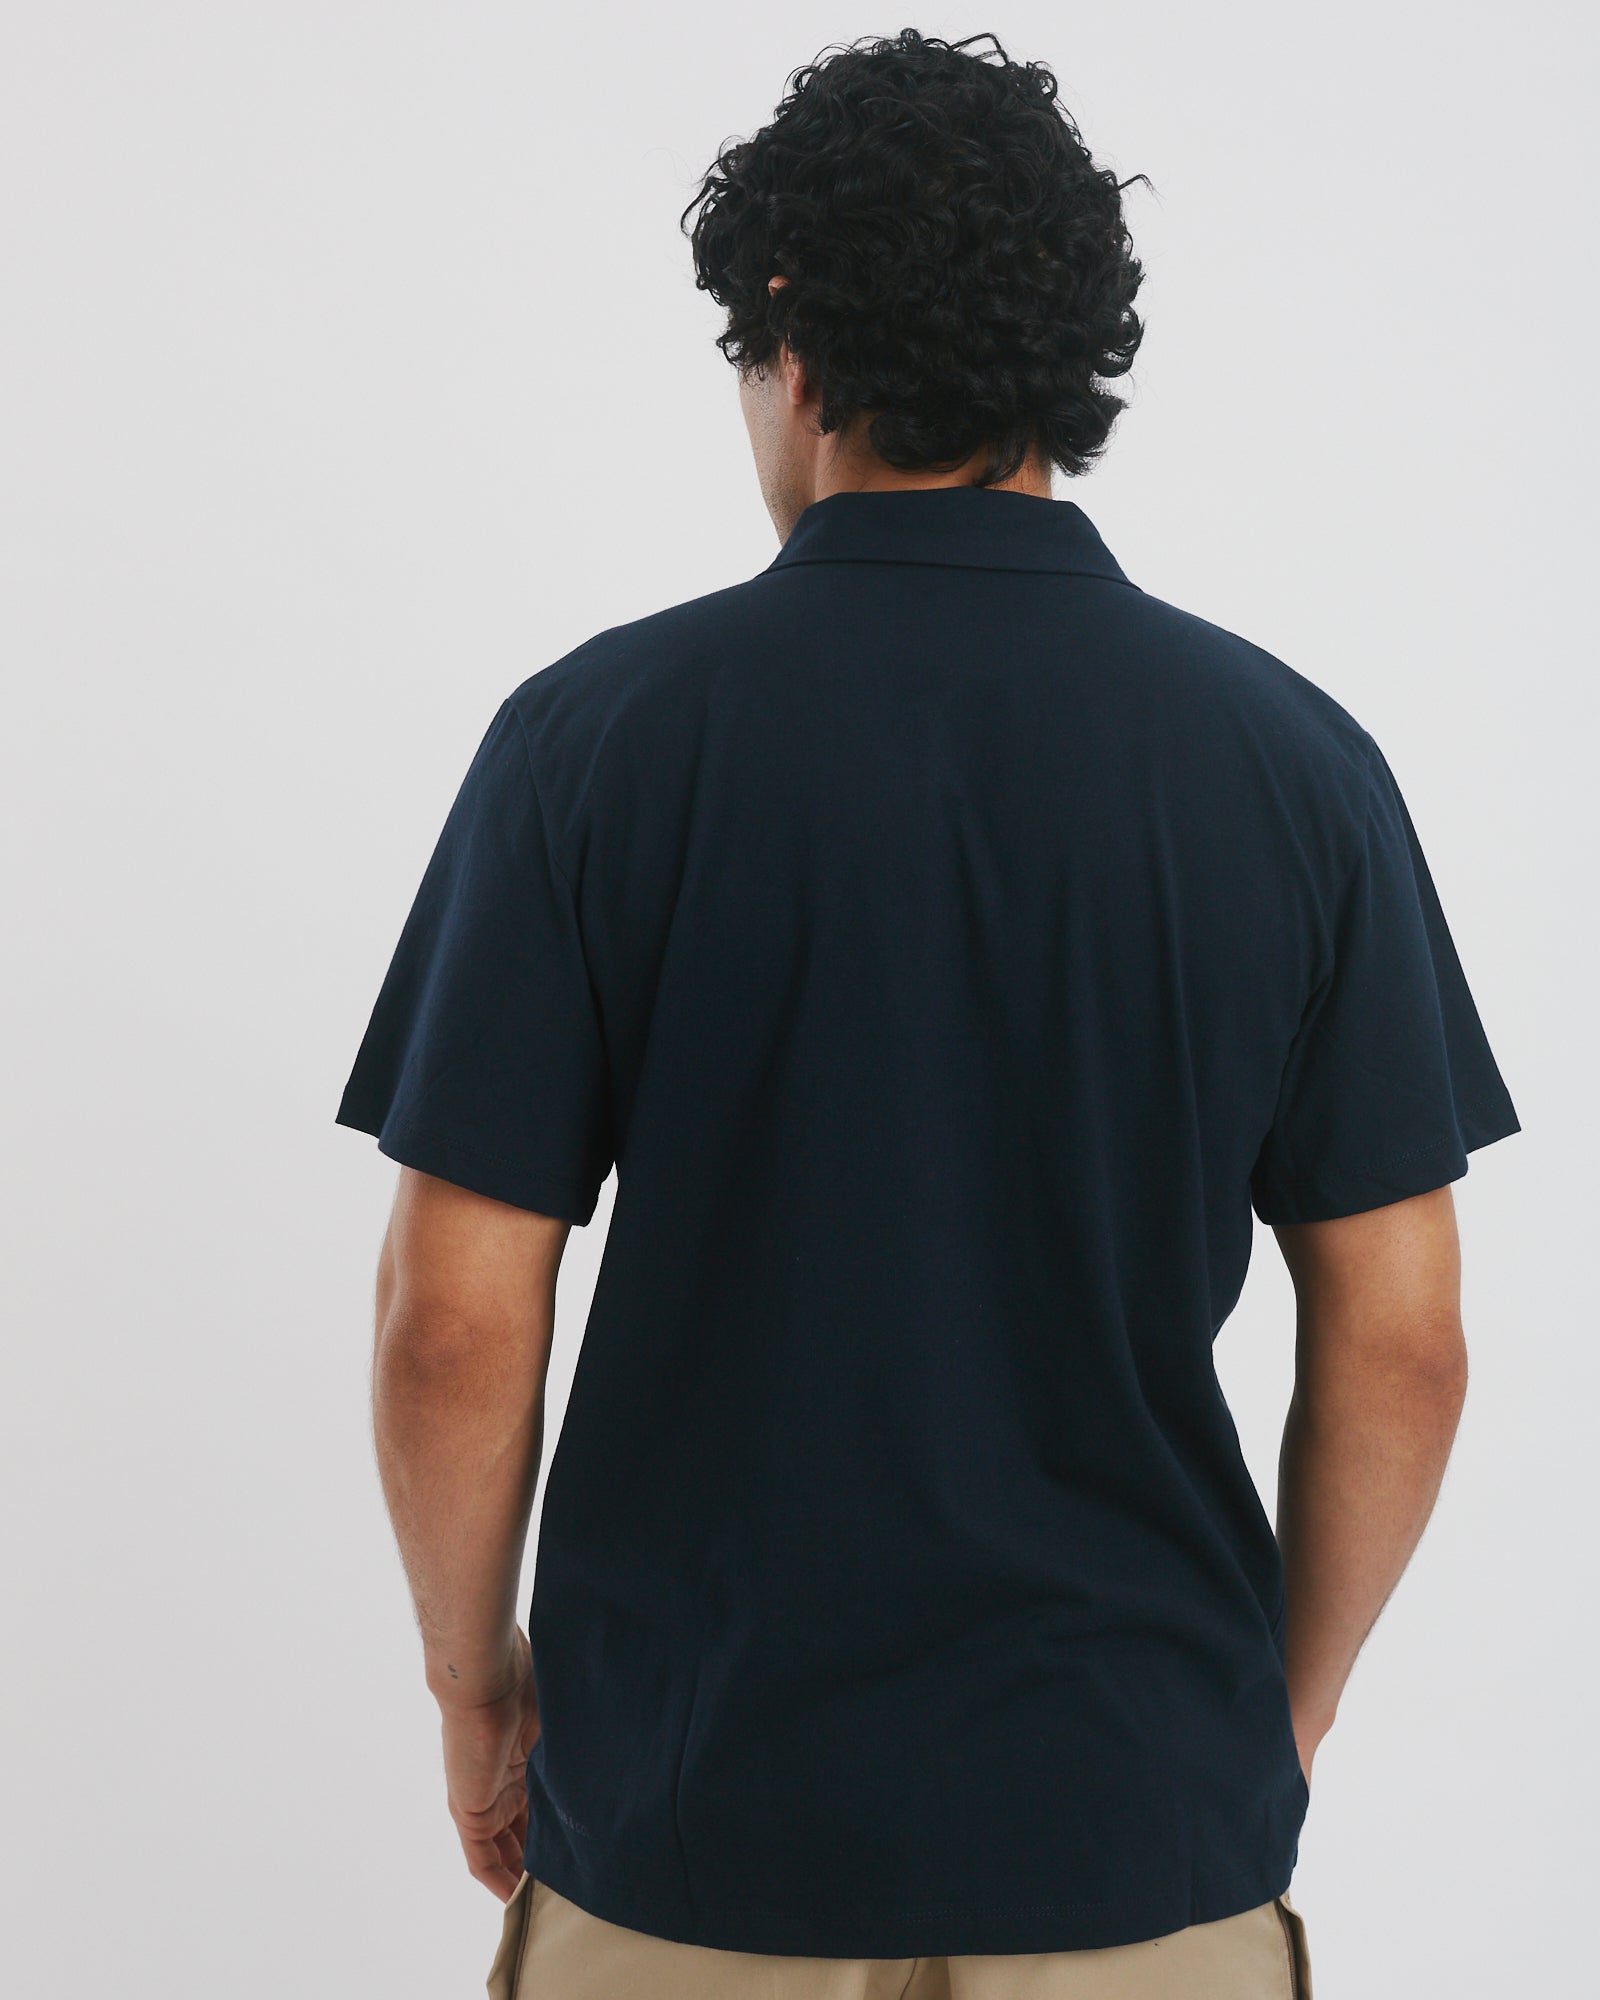 The Top  Fastening Polo Shirt  The Shapes United Polo Shirt.